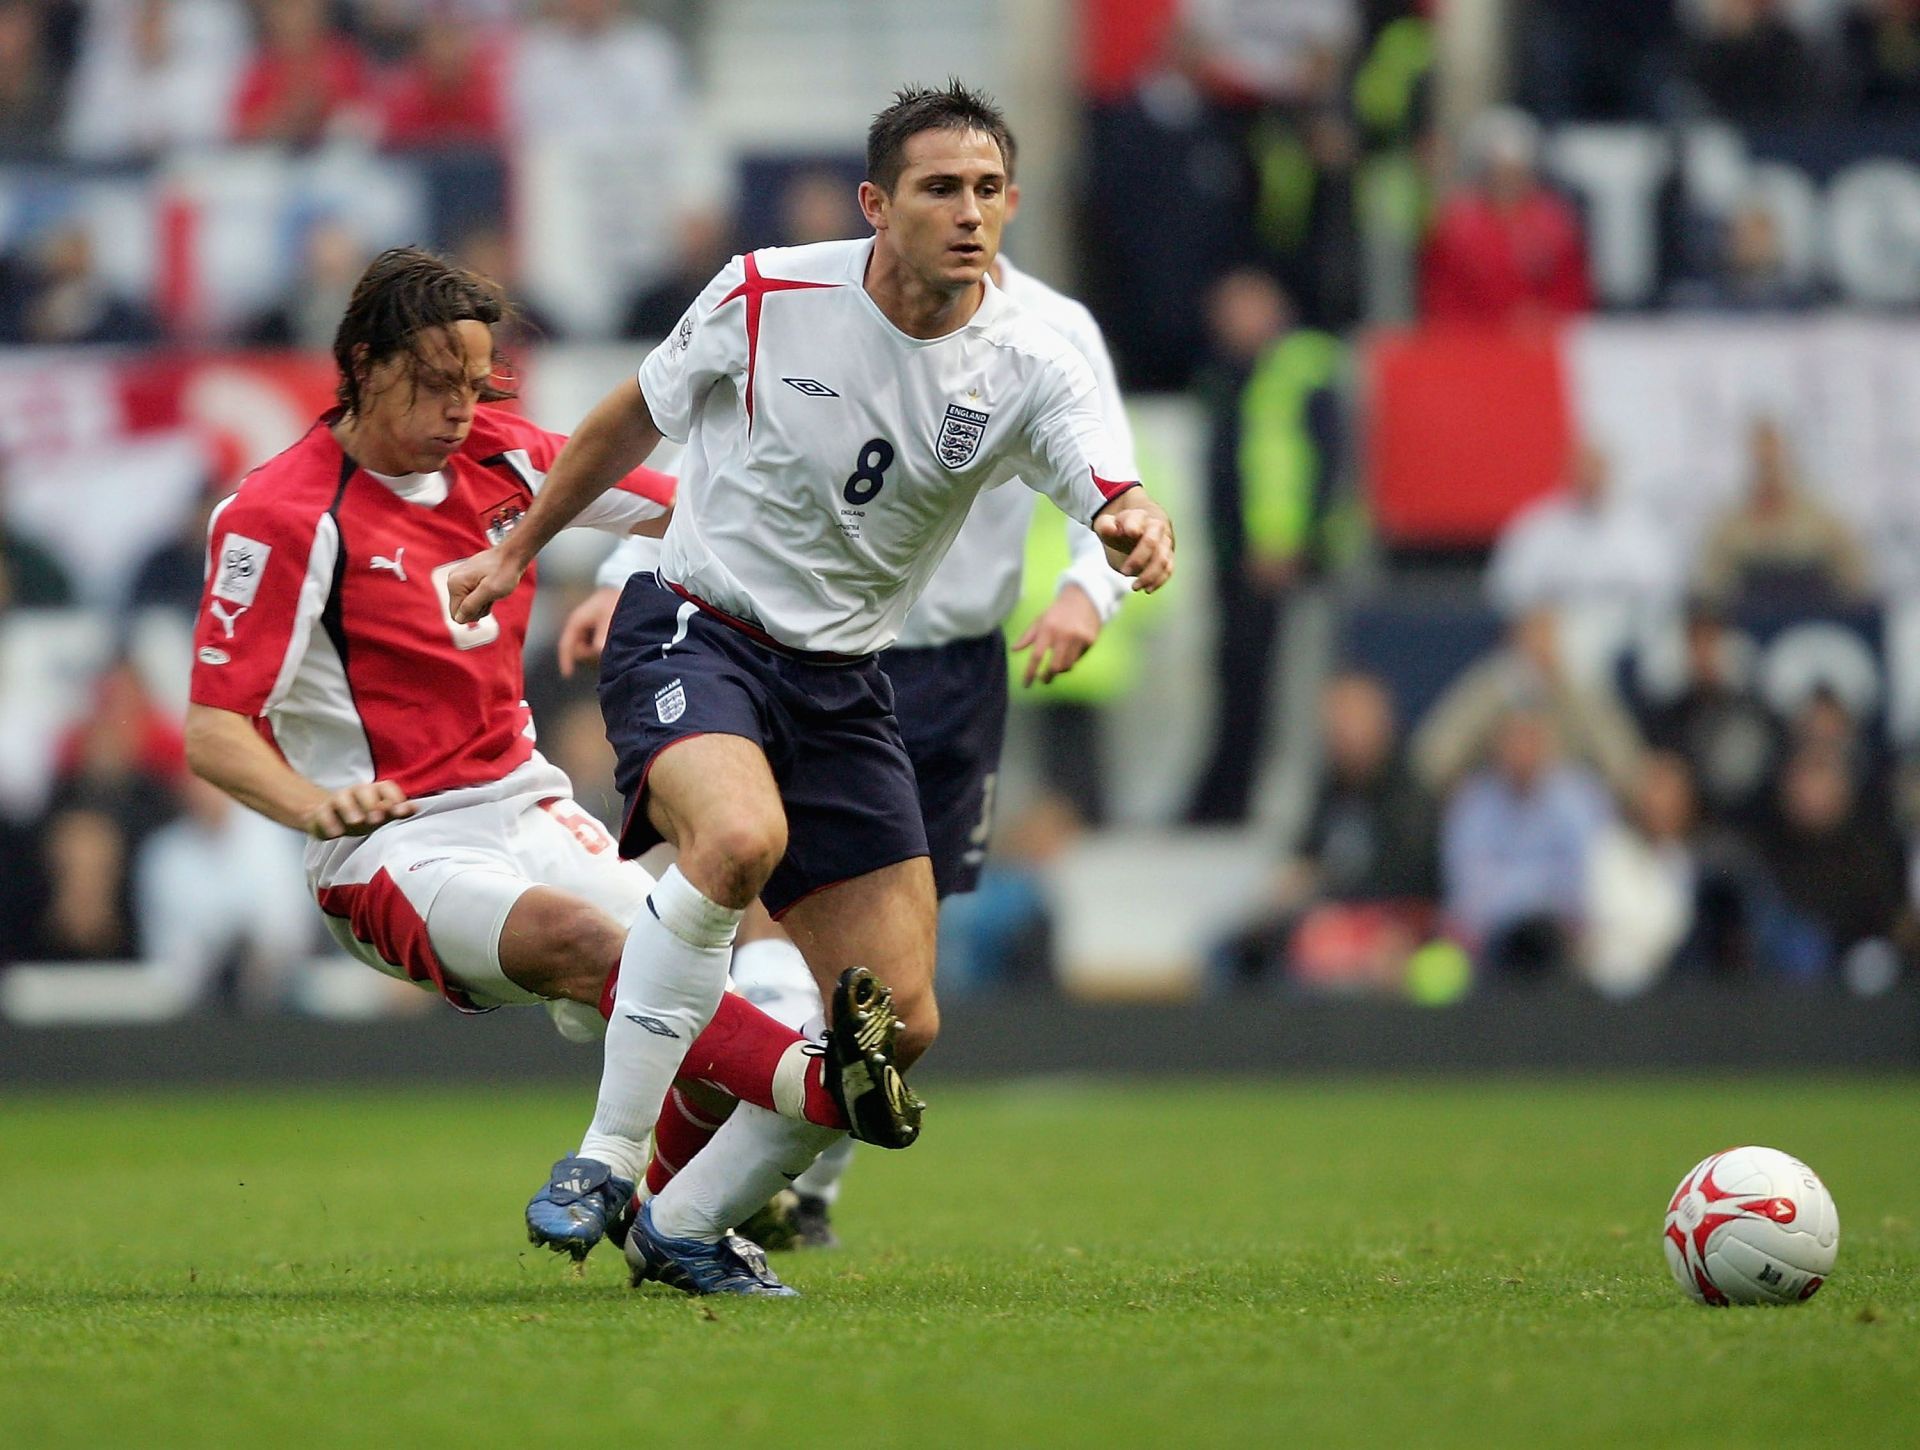 Rene Aufhauser challenges Frank Lampard in a FIFA World Cup qualifier